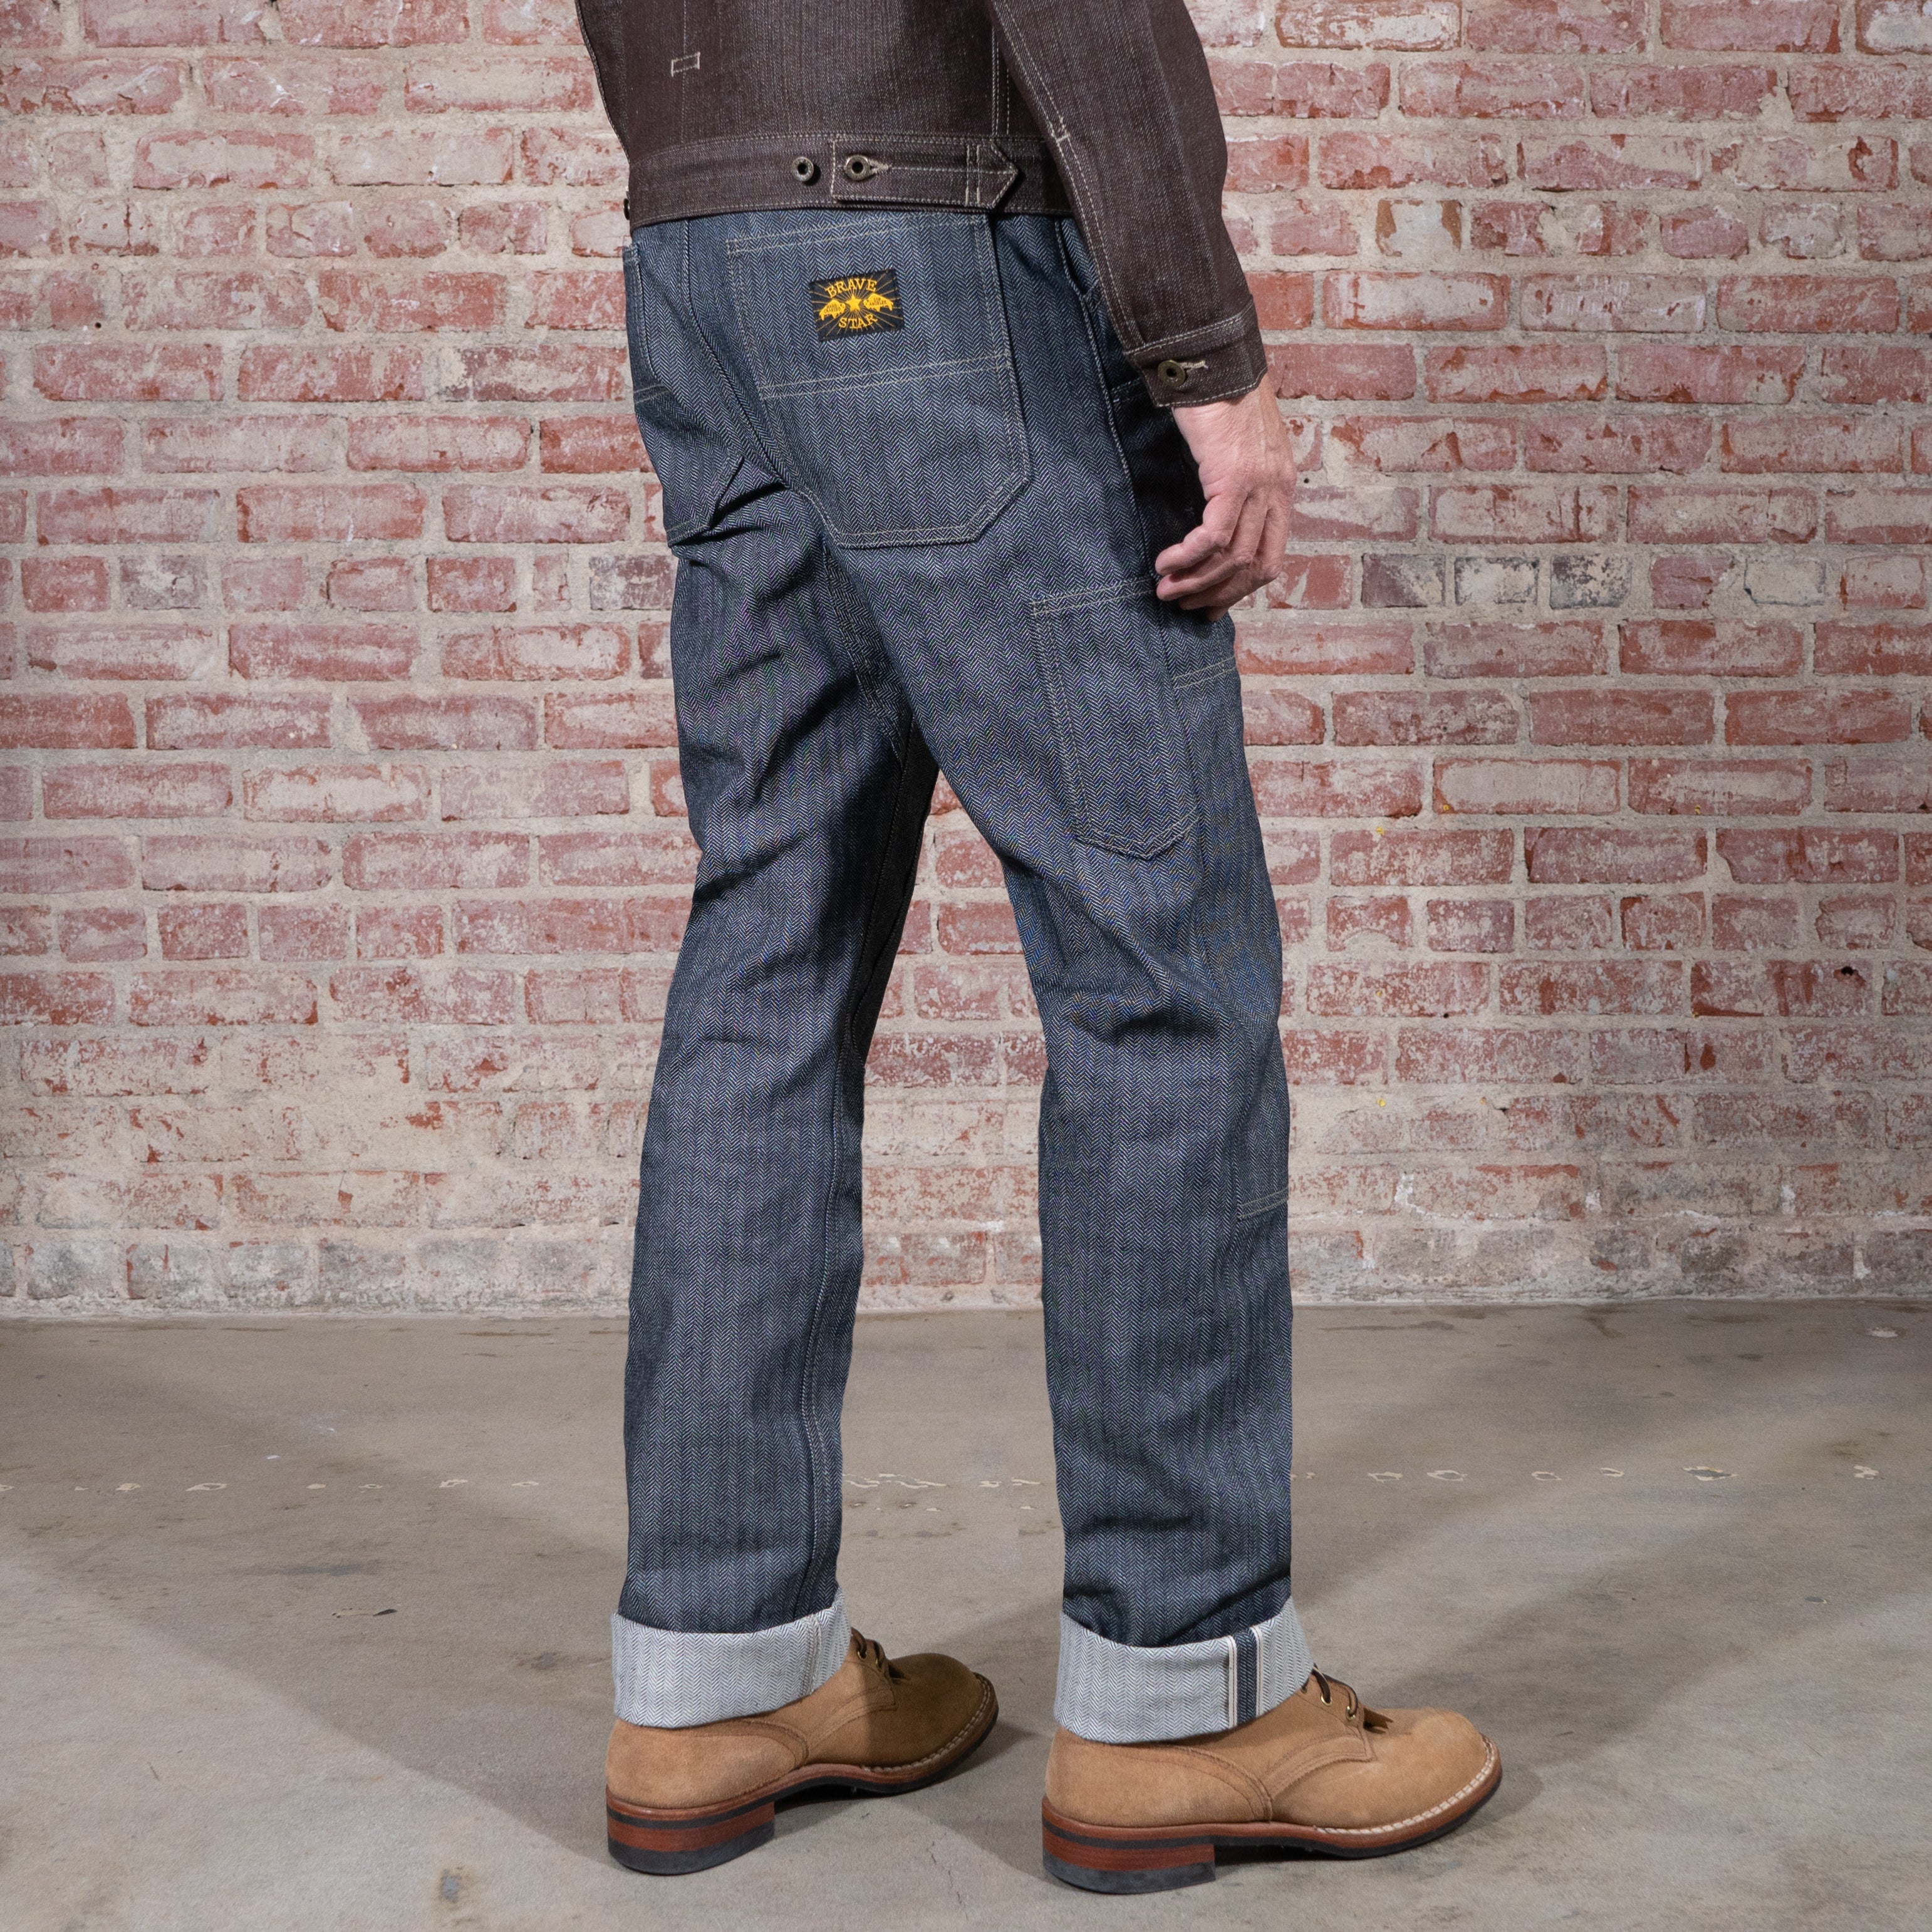 Men's Skinny Fit Guide: Compare Jeans Size Charts | Williamsburg